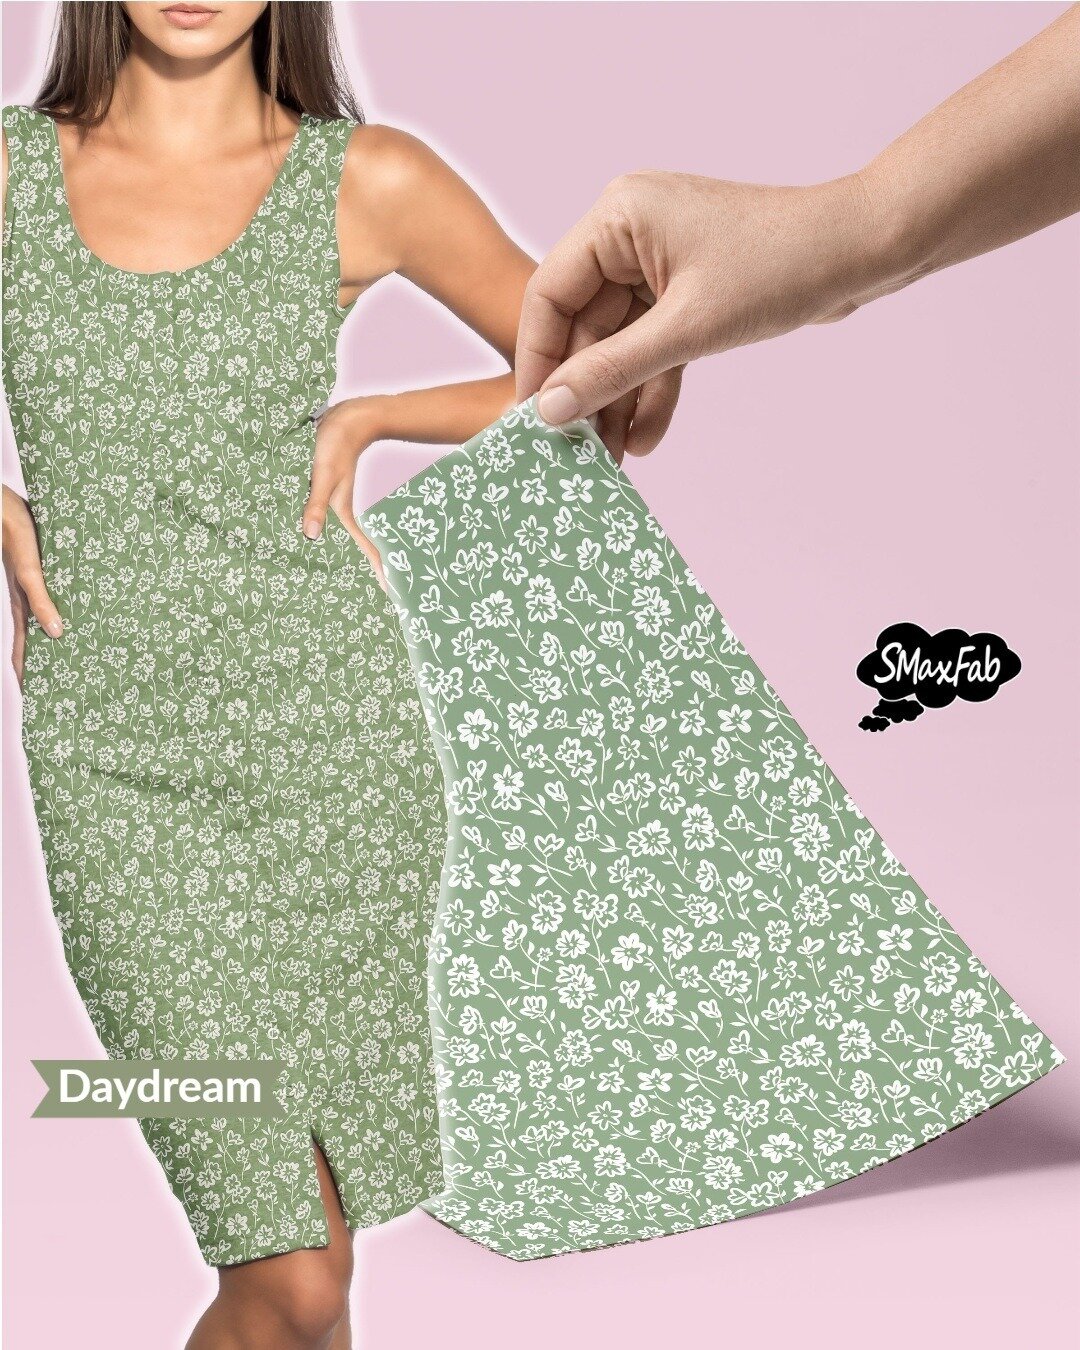 Simple, fresh.  Daydream 2-colour print for women's and children's apparel, quilting, home decor and more. A classic ditsy.  Like it?
___Sandi___